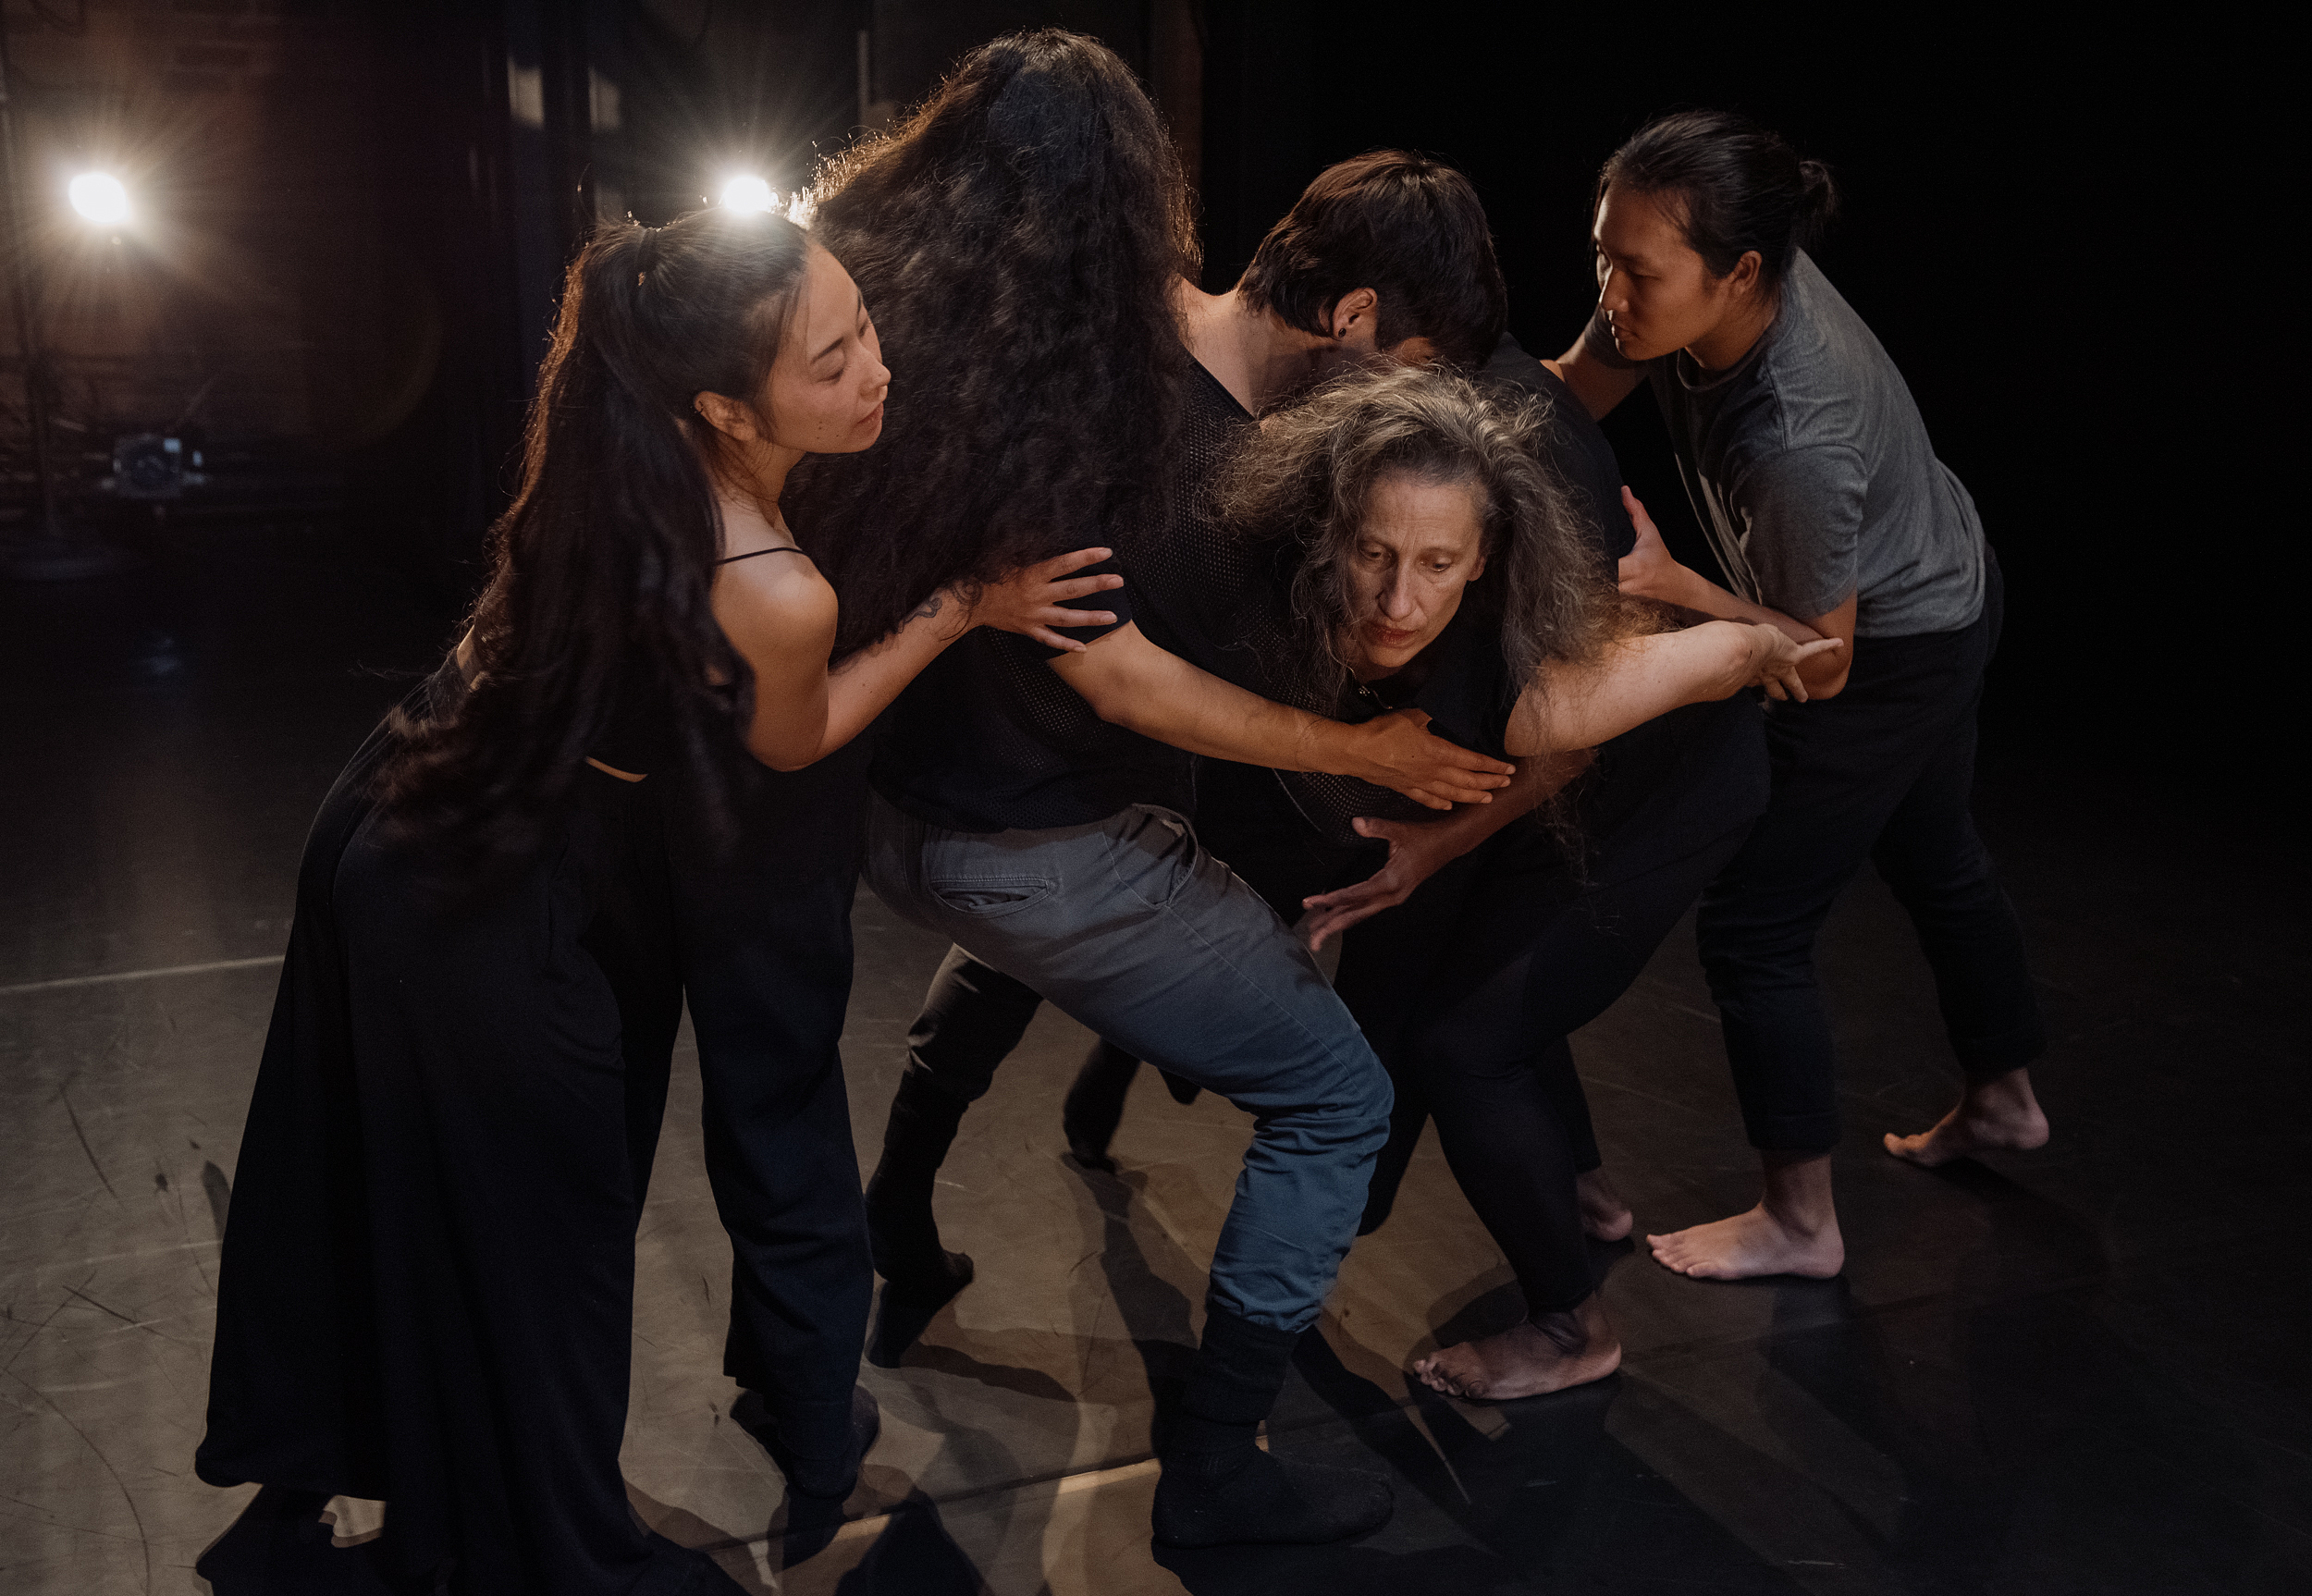 Dance as a Form for Storytelling